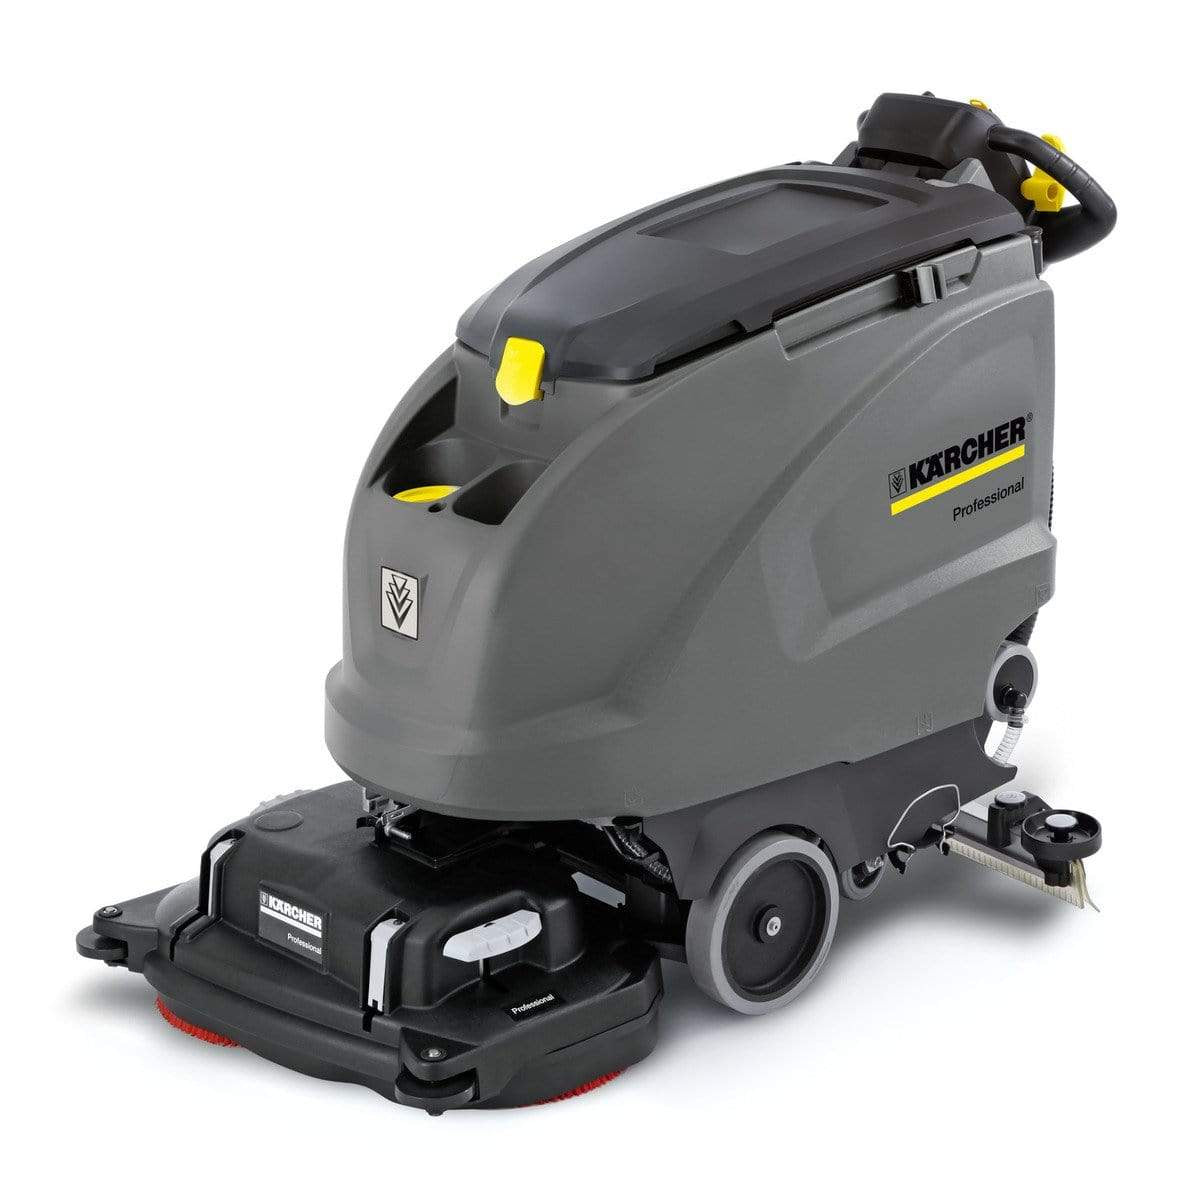 Karcher Scrubber Drier - B 60 W | Supply Master | Accra, Ghana Tools Building Steel Engineering Hardware tool